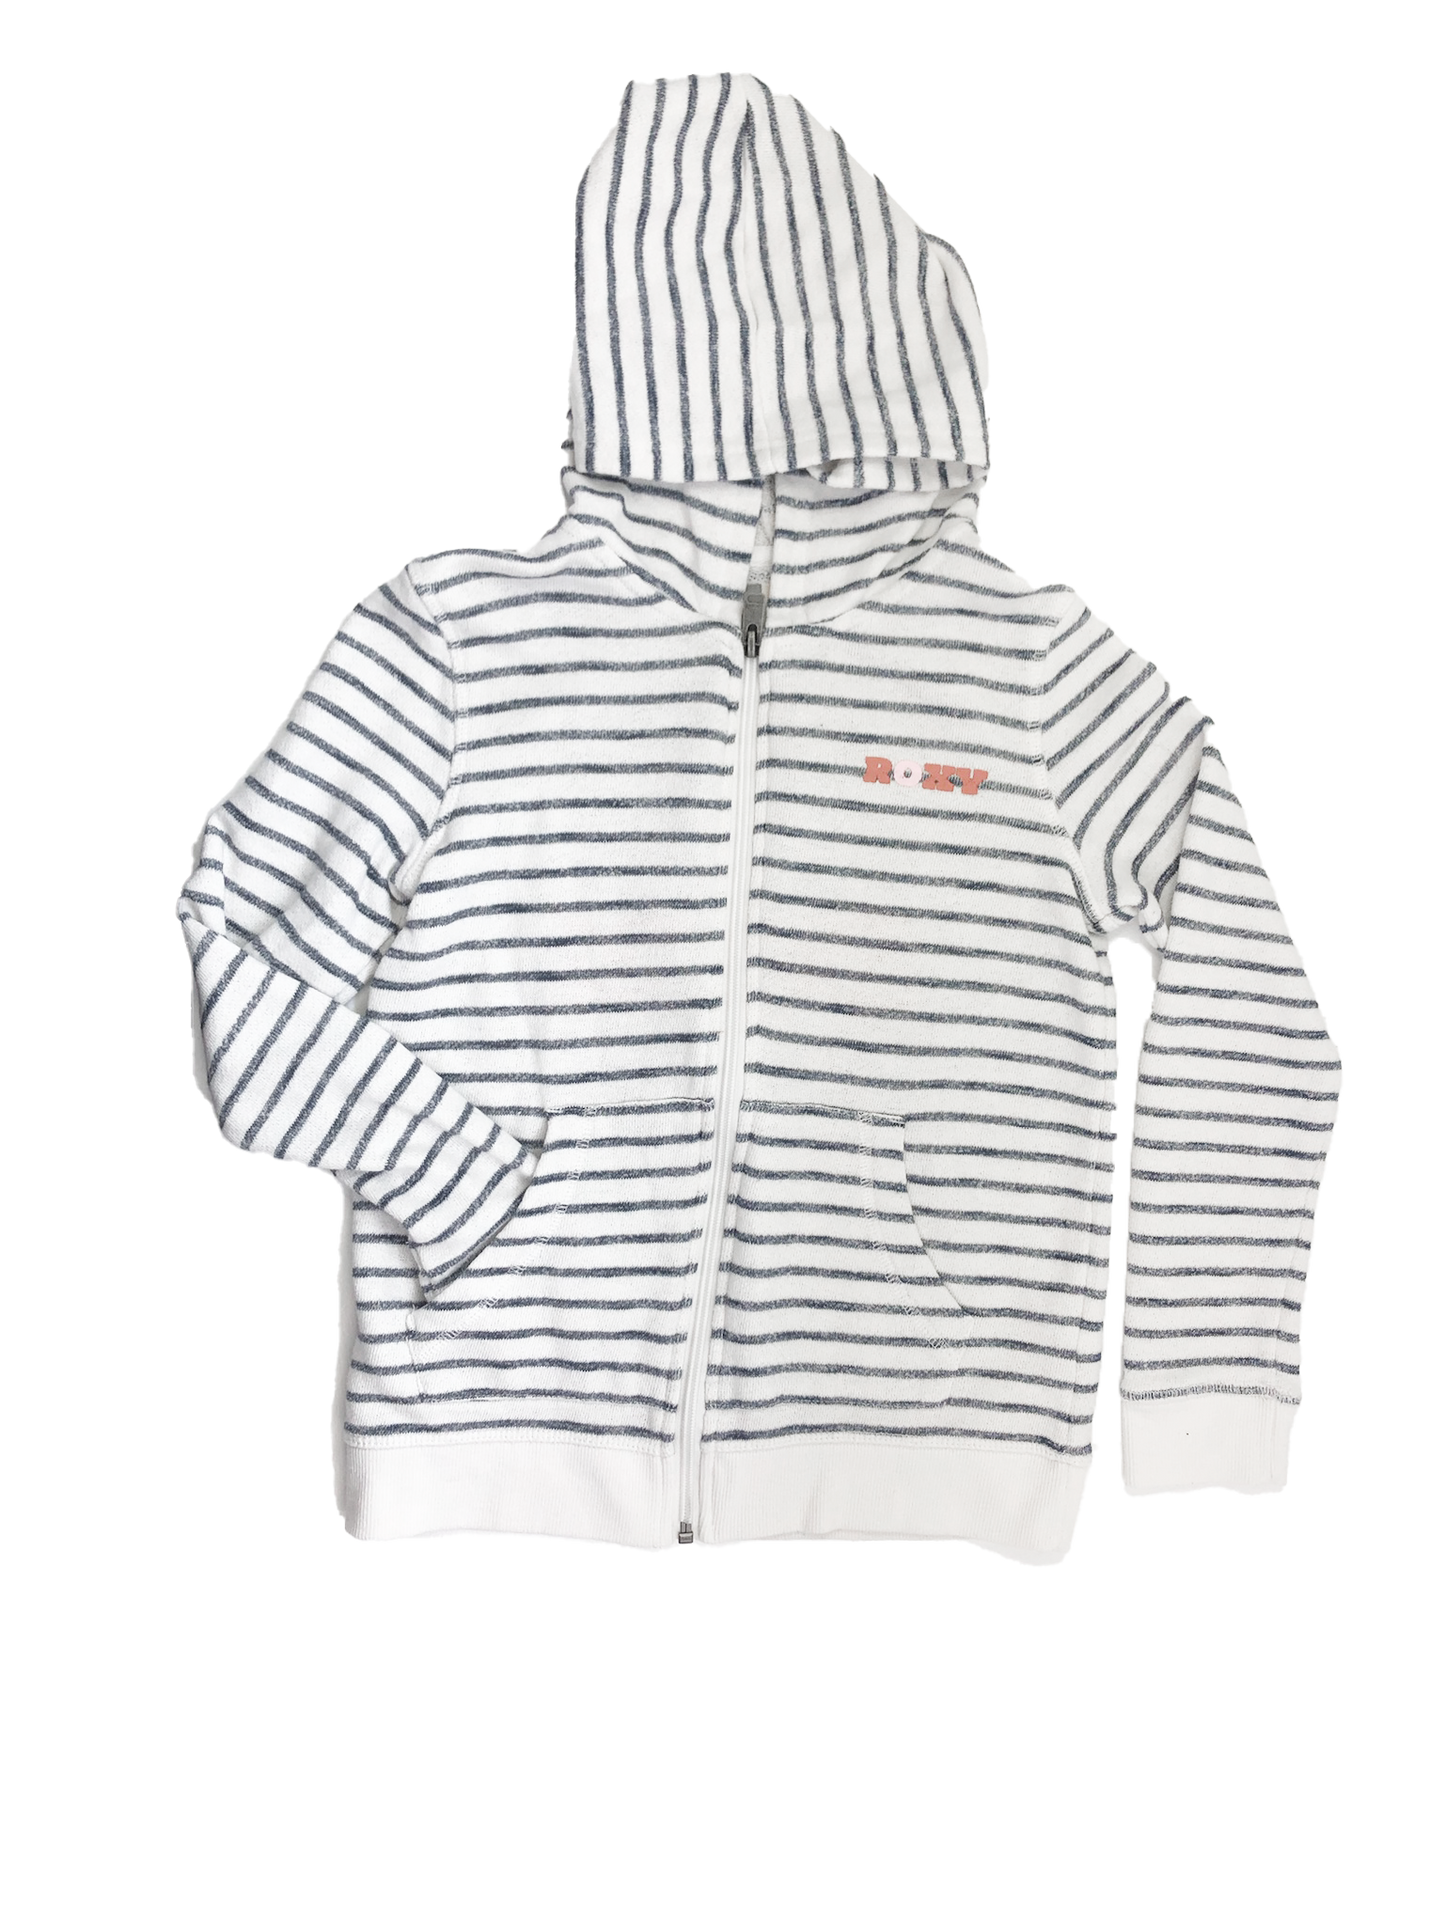 Roxy White Hooded Zip-Up with Navy Stripes 10